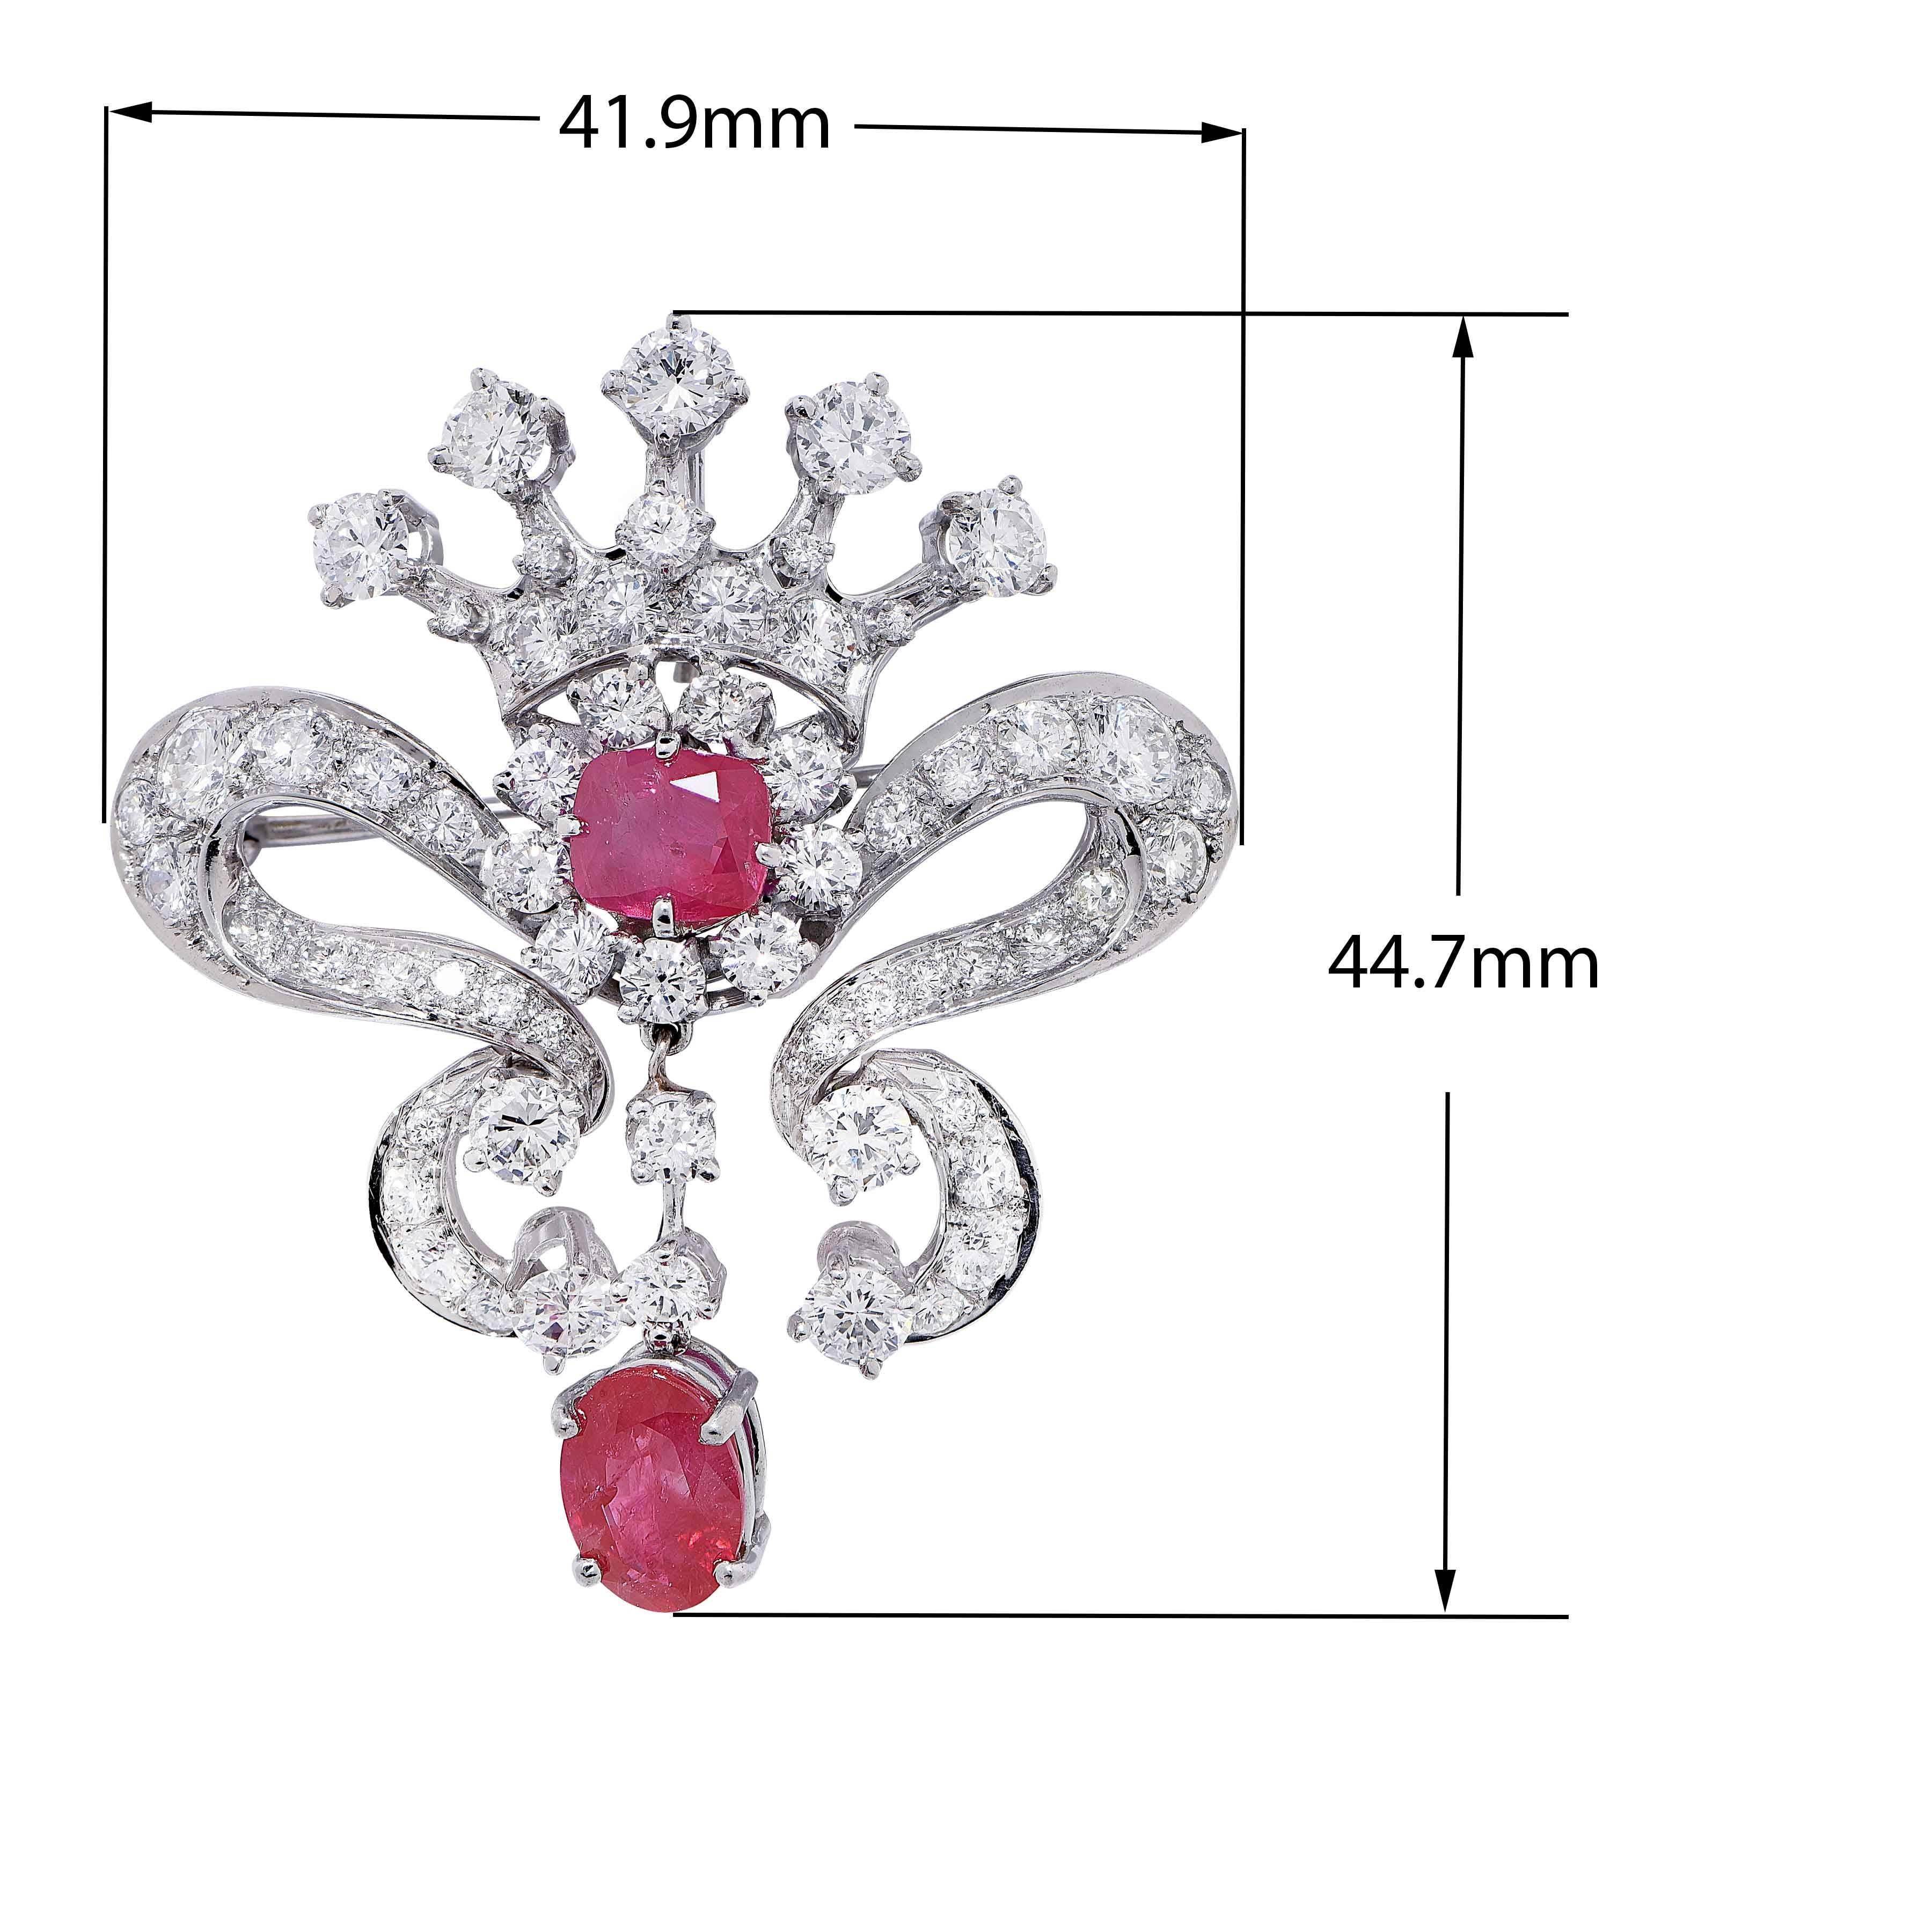 6.5 Carat Diamond and 3.7 Carat Burmese Ruby Platinum Ribbon Design Brooch In Excellent Condition For Sale In Bay Harbor Islands, FL